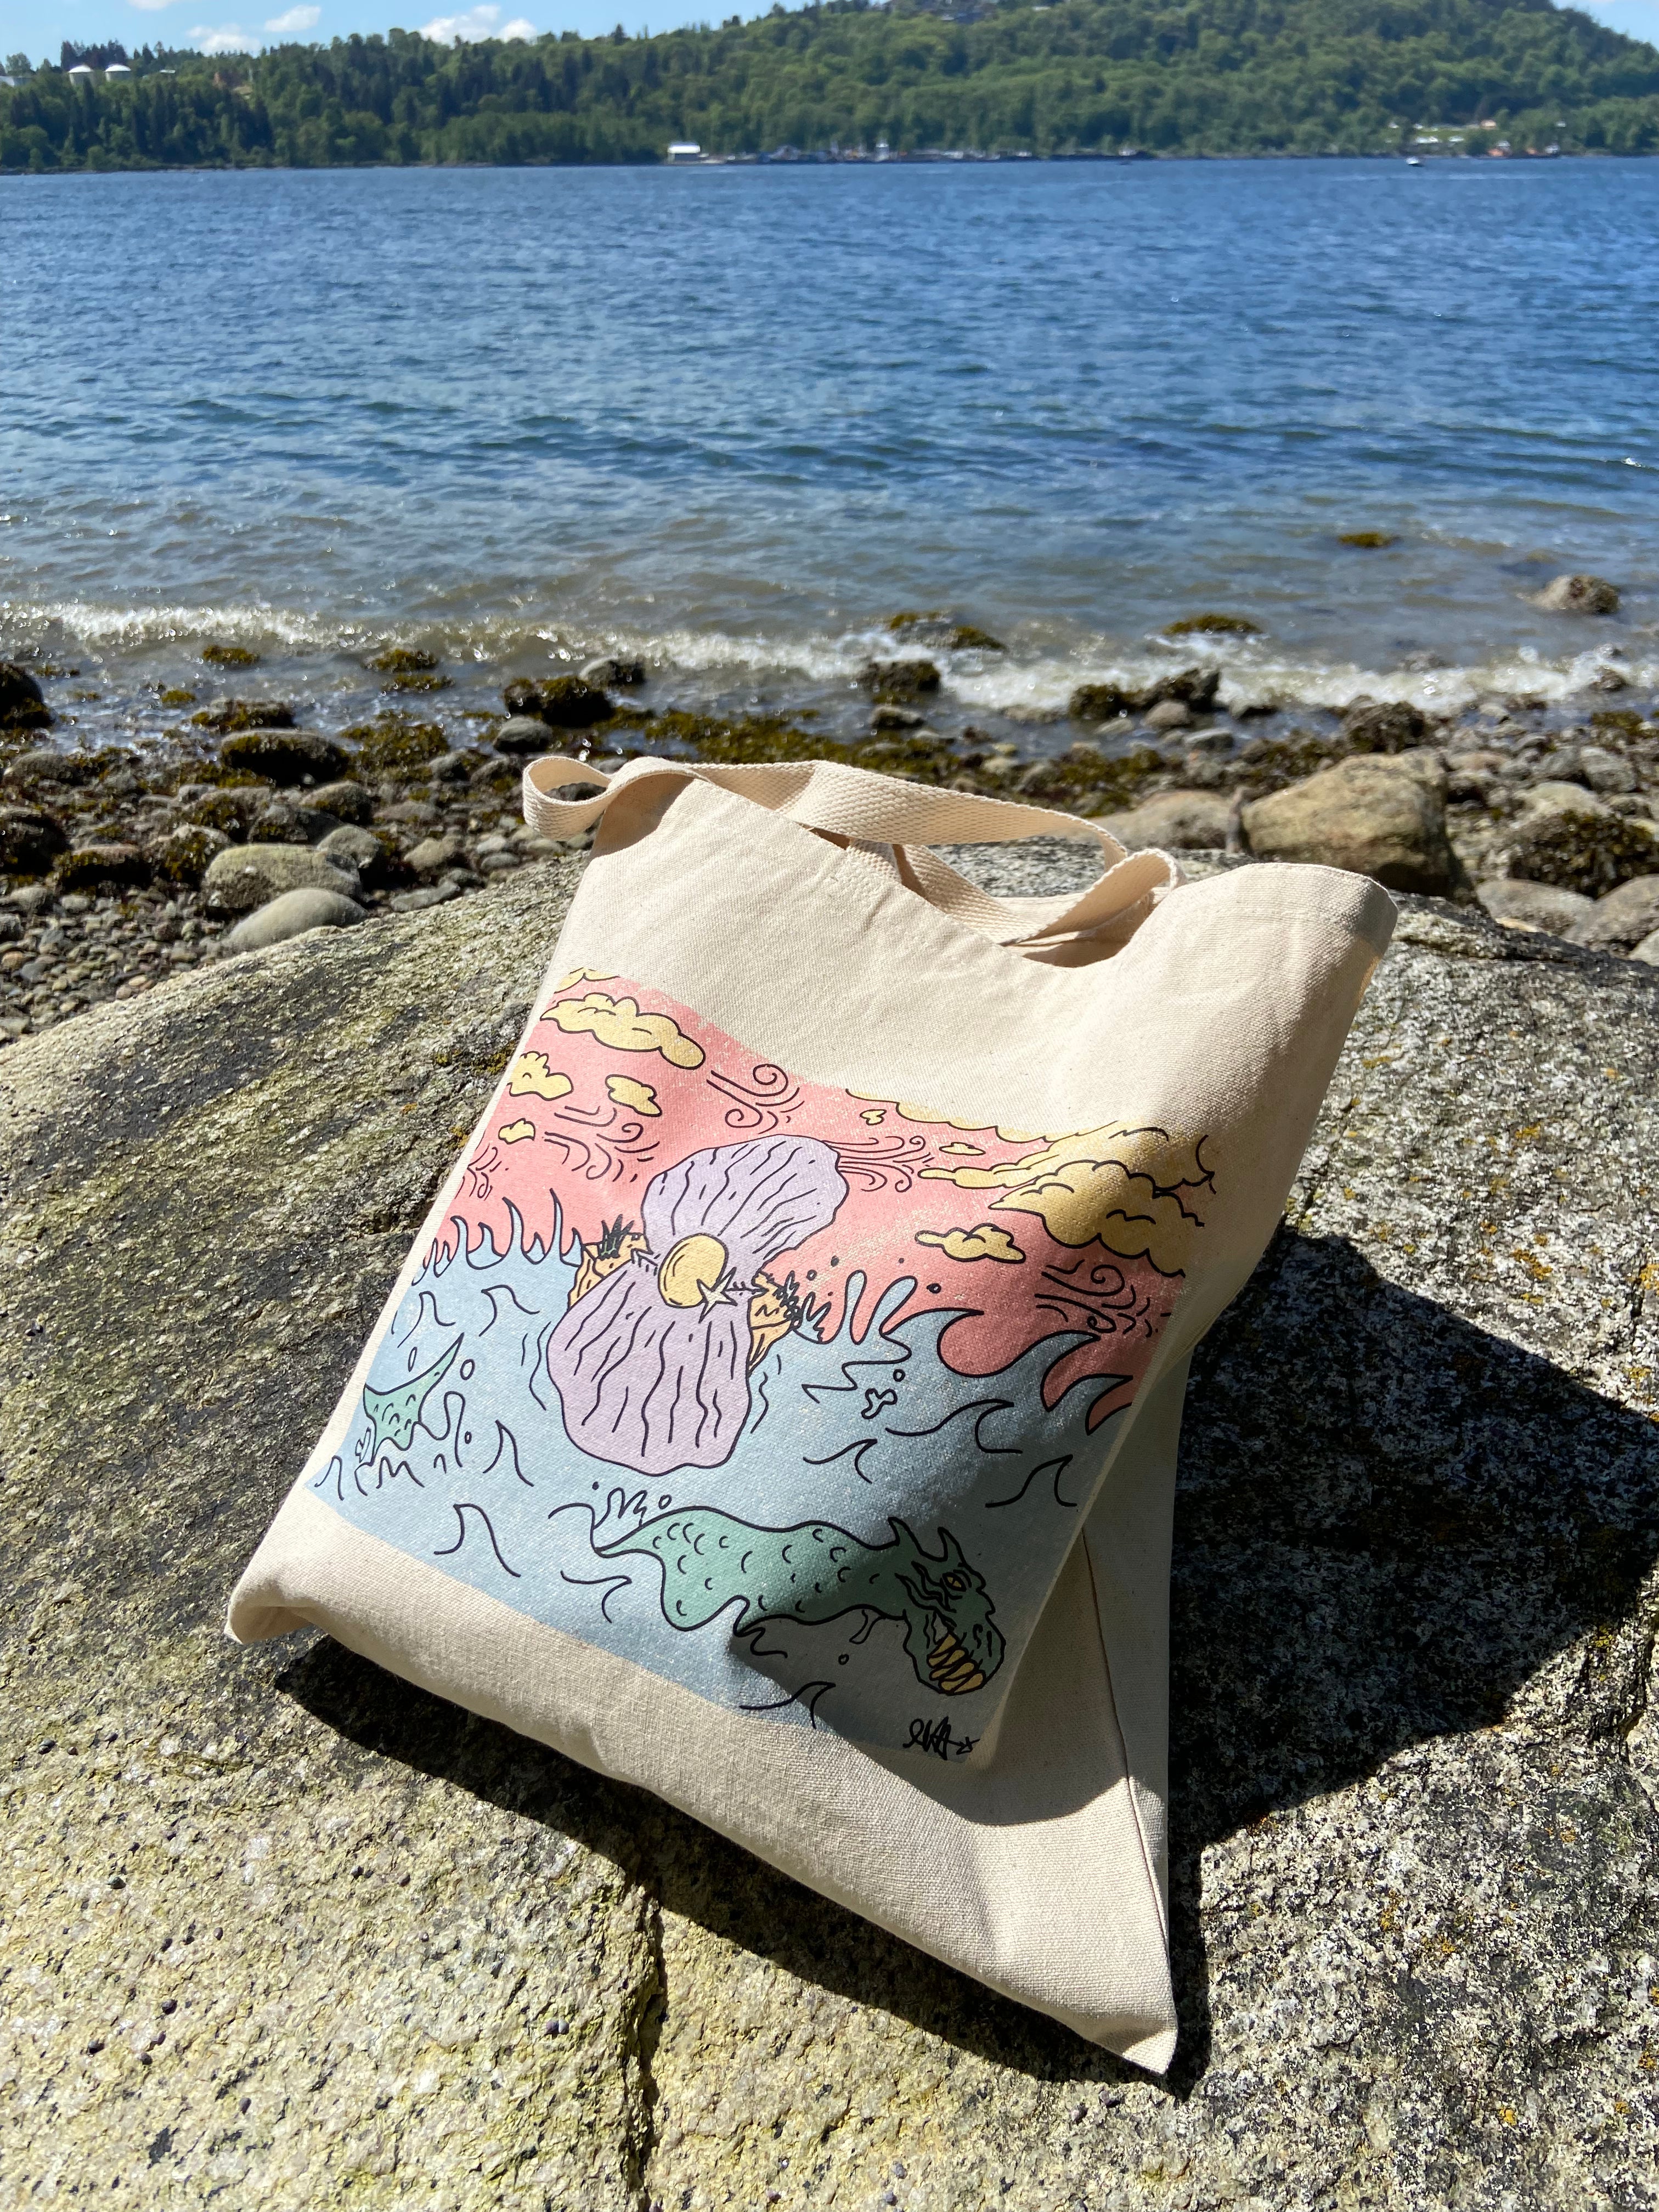 Clamshell Tote Bag